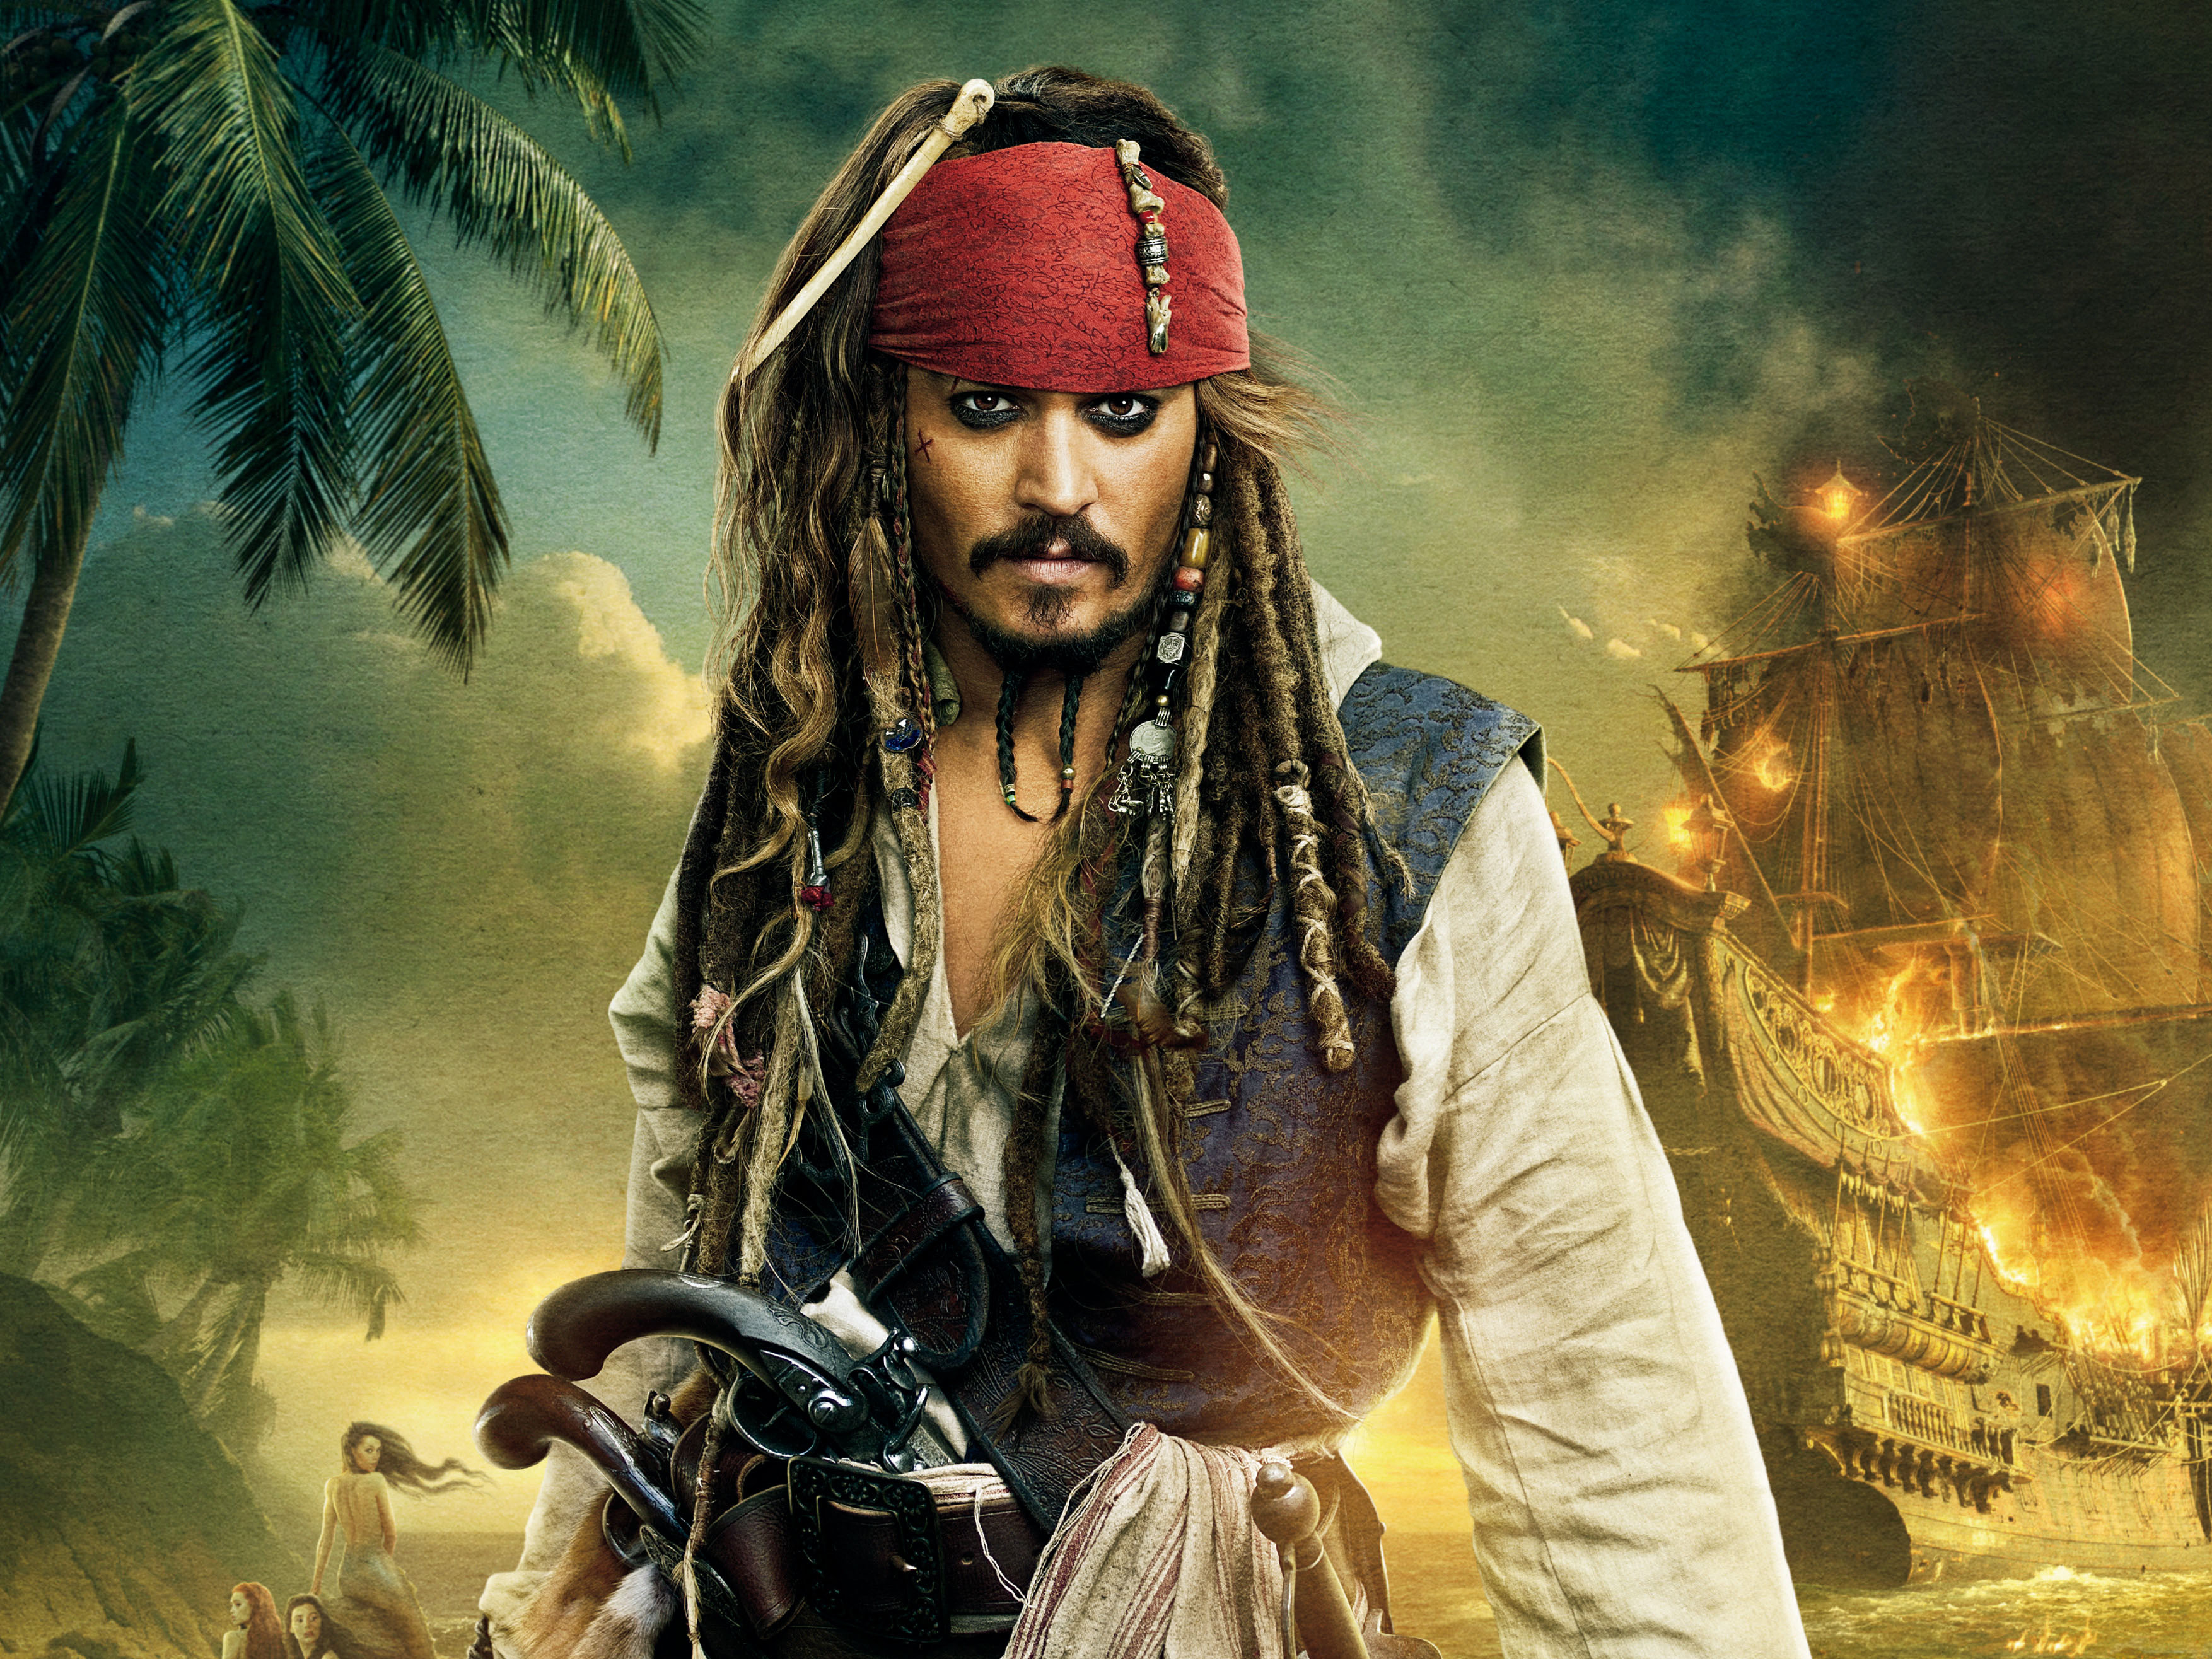 Pirates Of The Caribbean: On Stranger Tides Backgrounds, Pictures, Images - What Is Pirates Of The Caribbean Streaming On